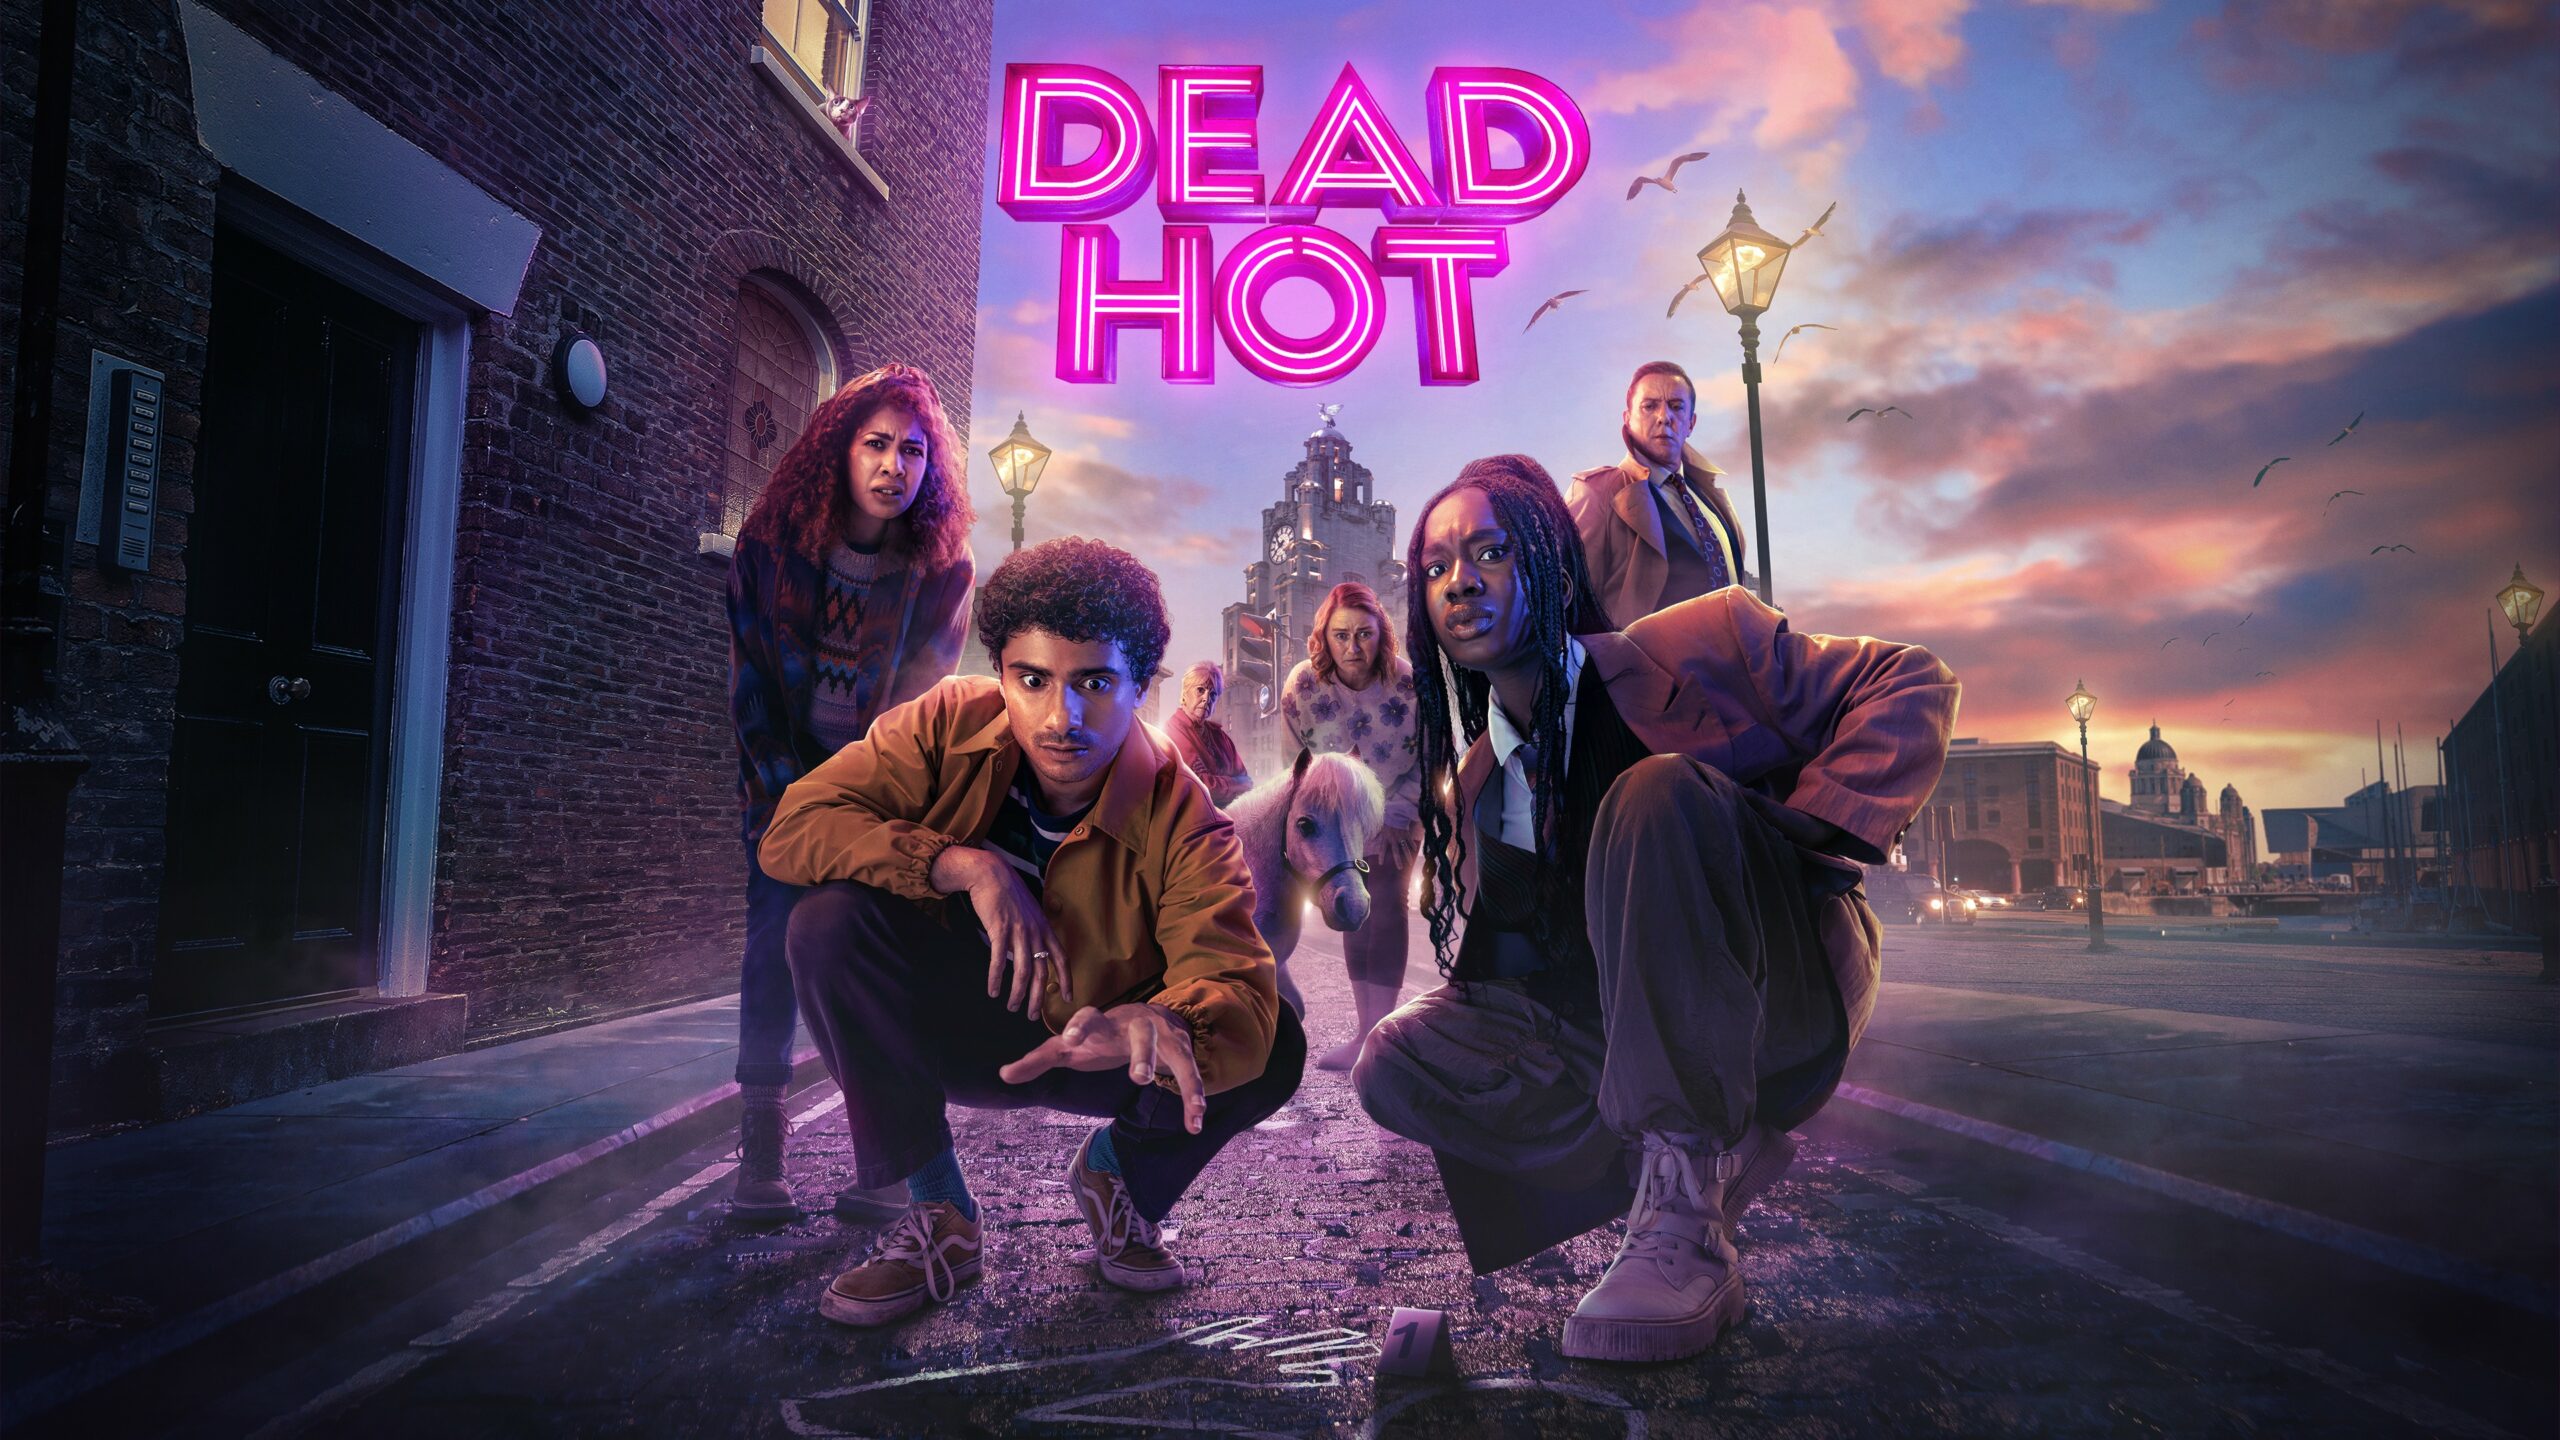 Dead Hot Season 2 Release Date And All Other Updates!